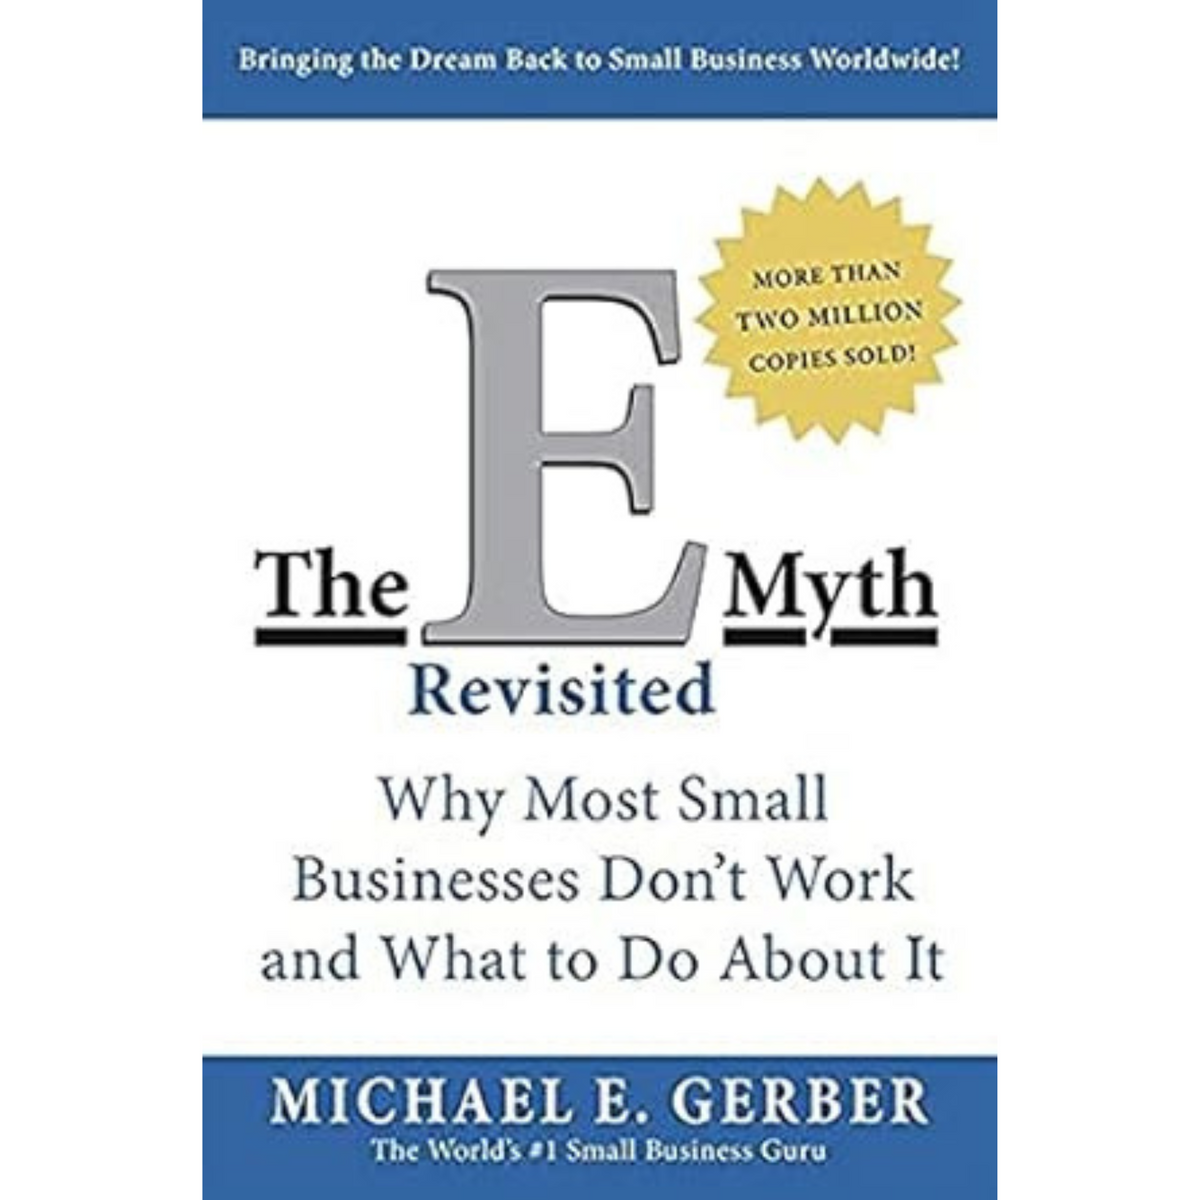 The E-Myth Revisited by Gerber, Michael E